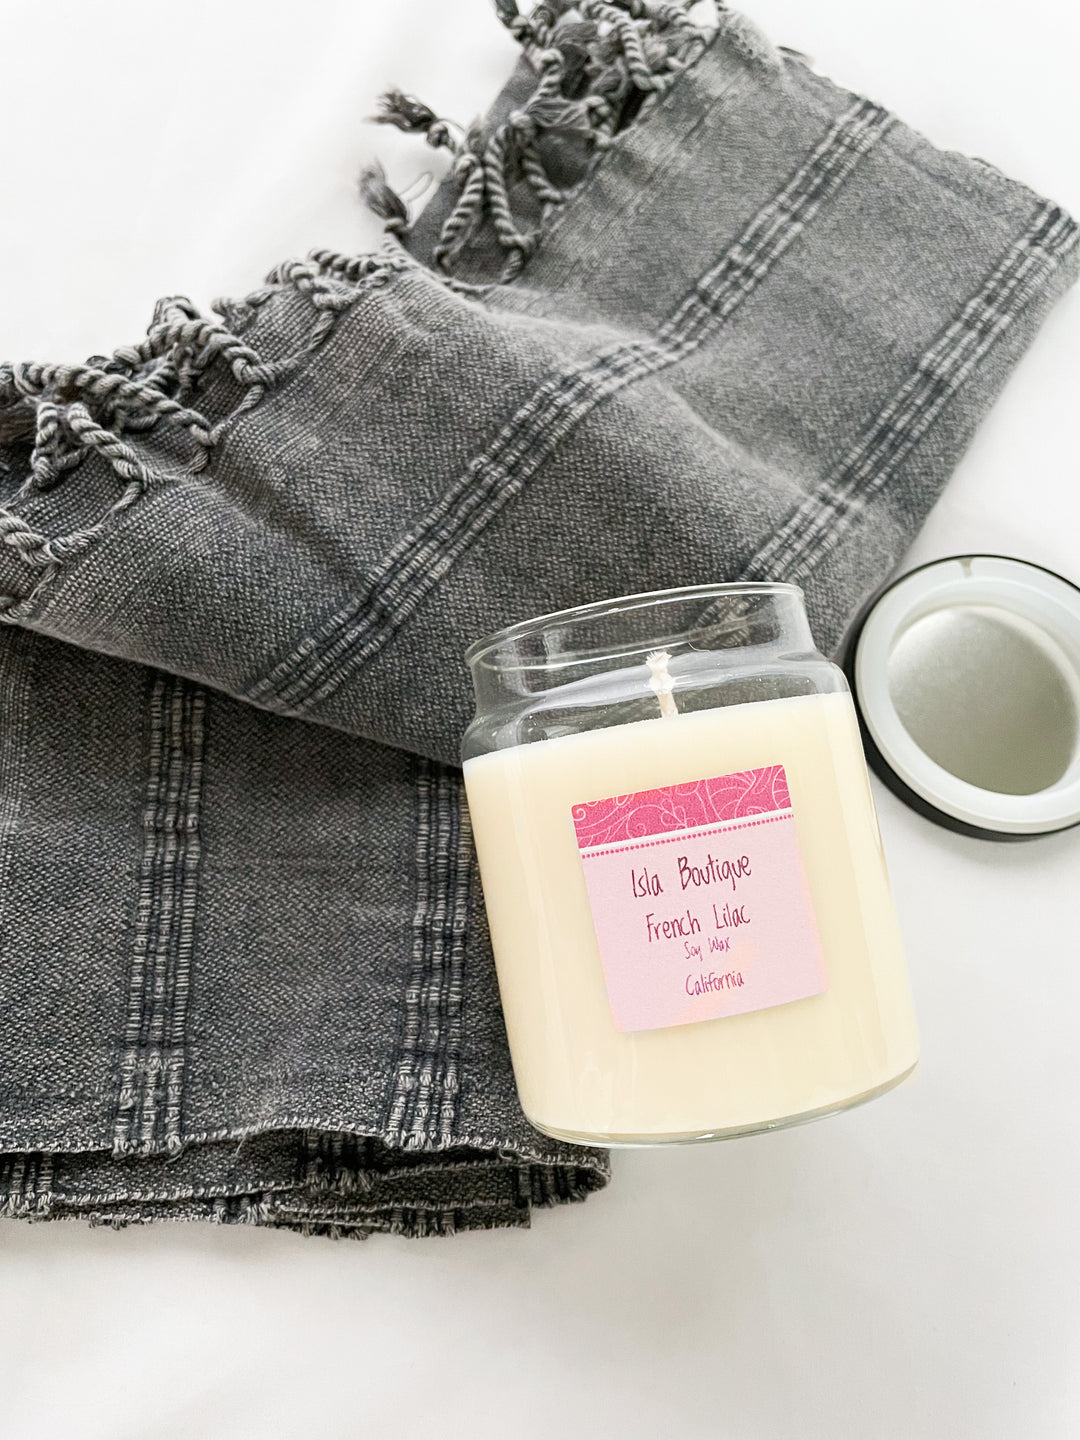 french lilac scented soy candle with grey tea towel